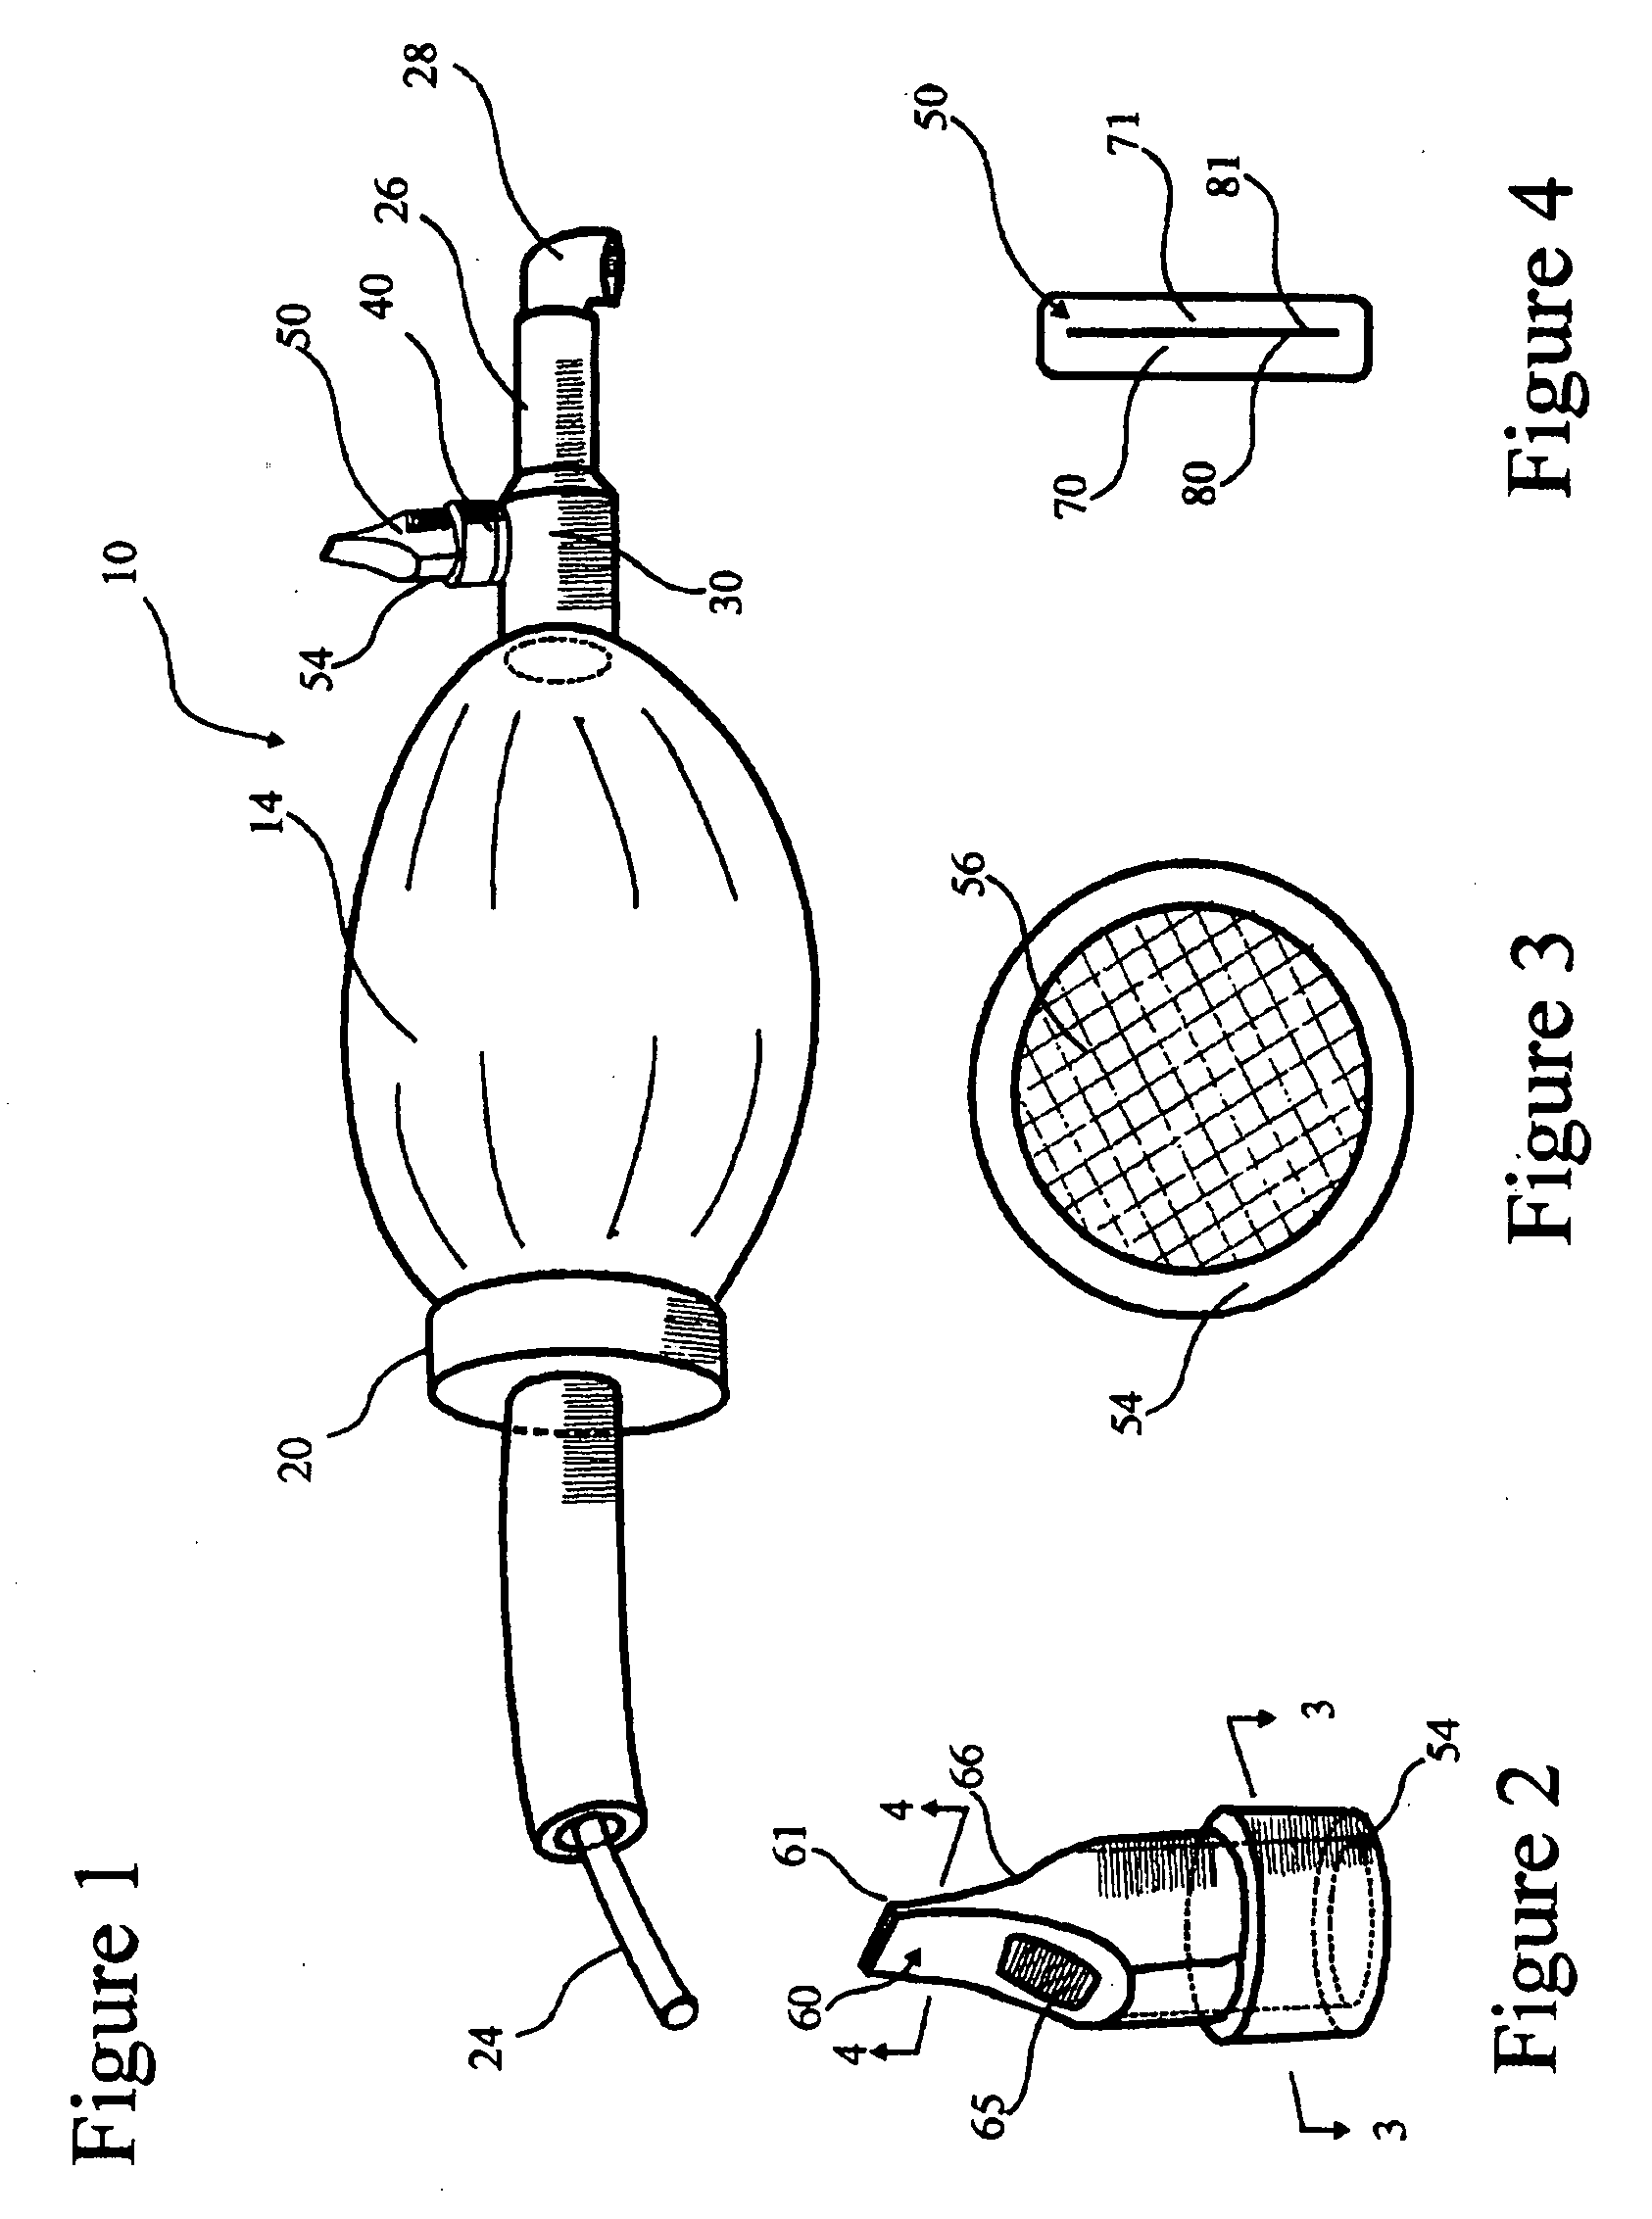 Apparatus and method for the simulation of the adverse cardiovascular effects of dynamic hyperinflation